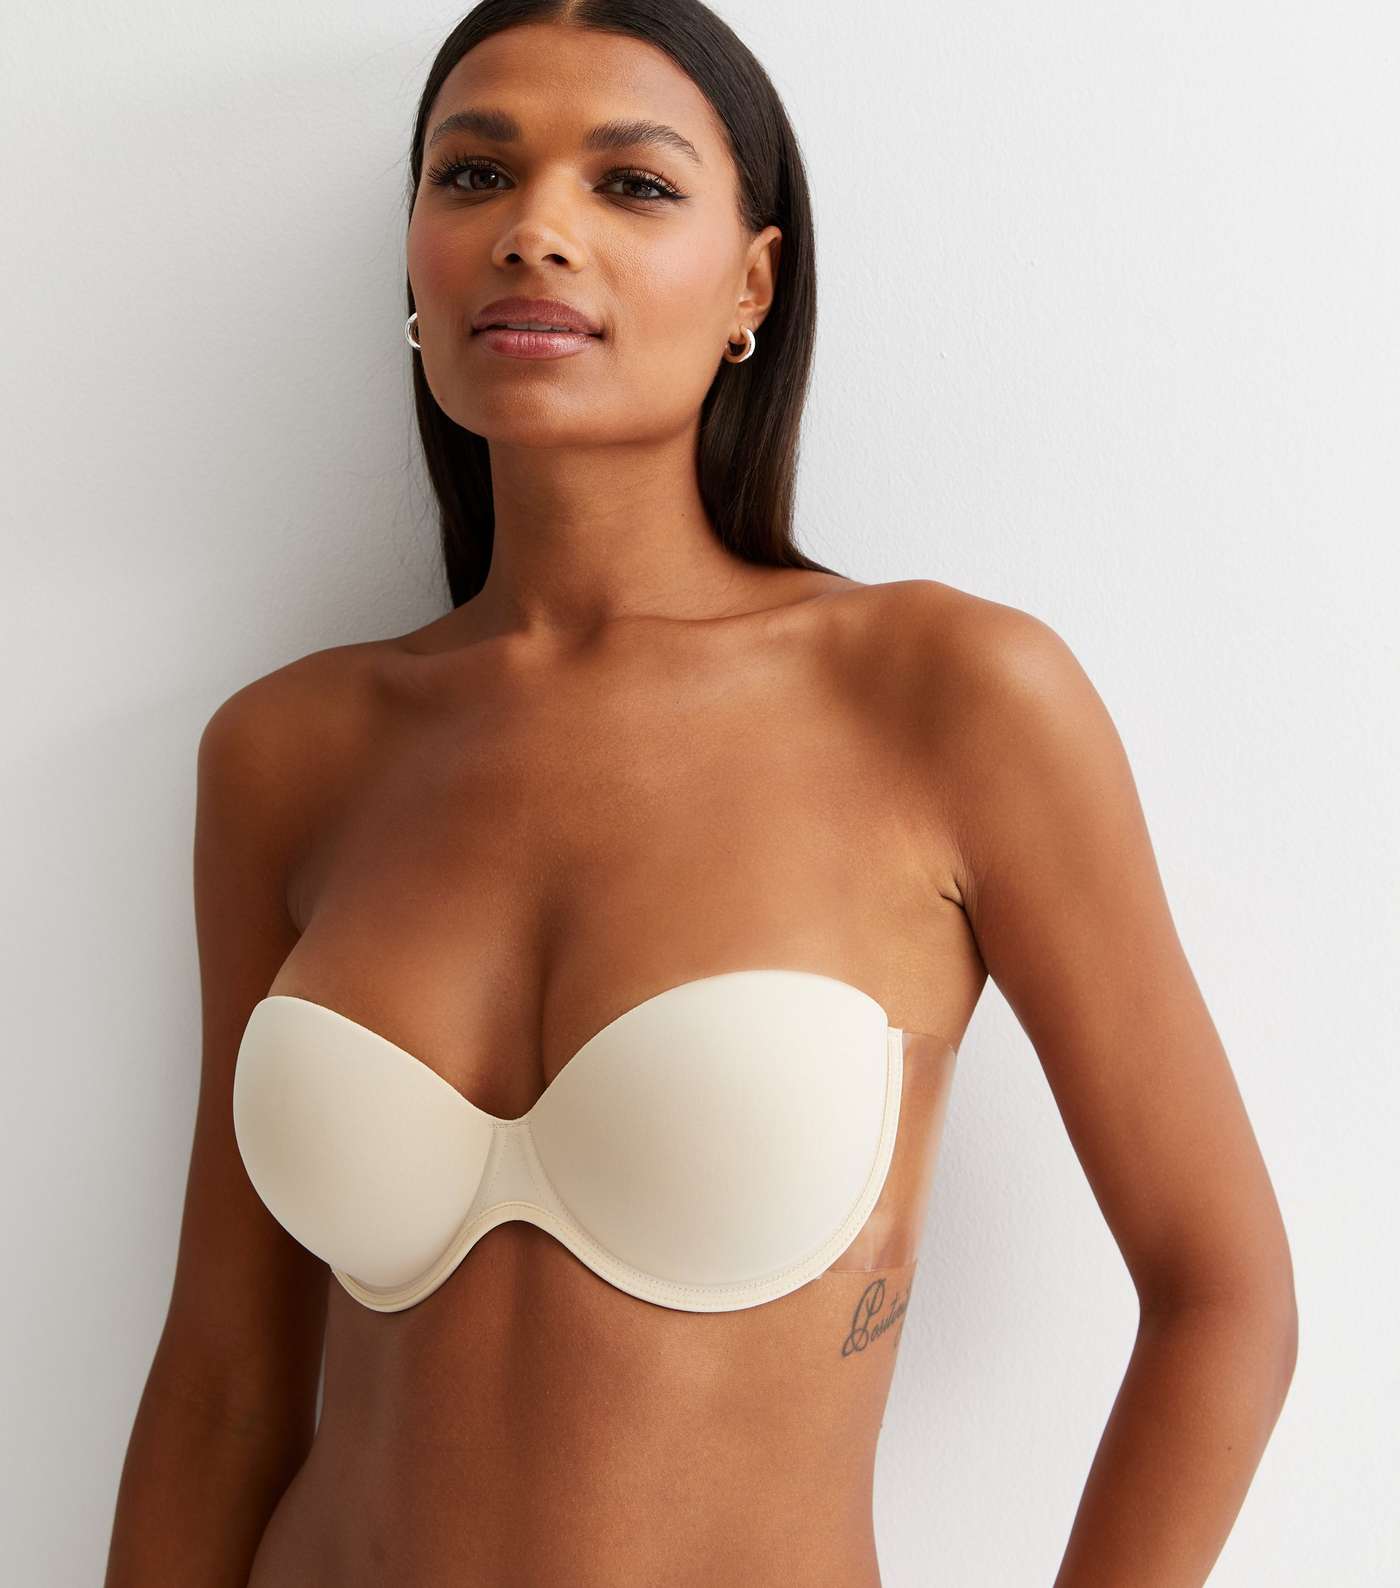 Perfection Beauty Tan A Cup Wing Stick On Bra